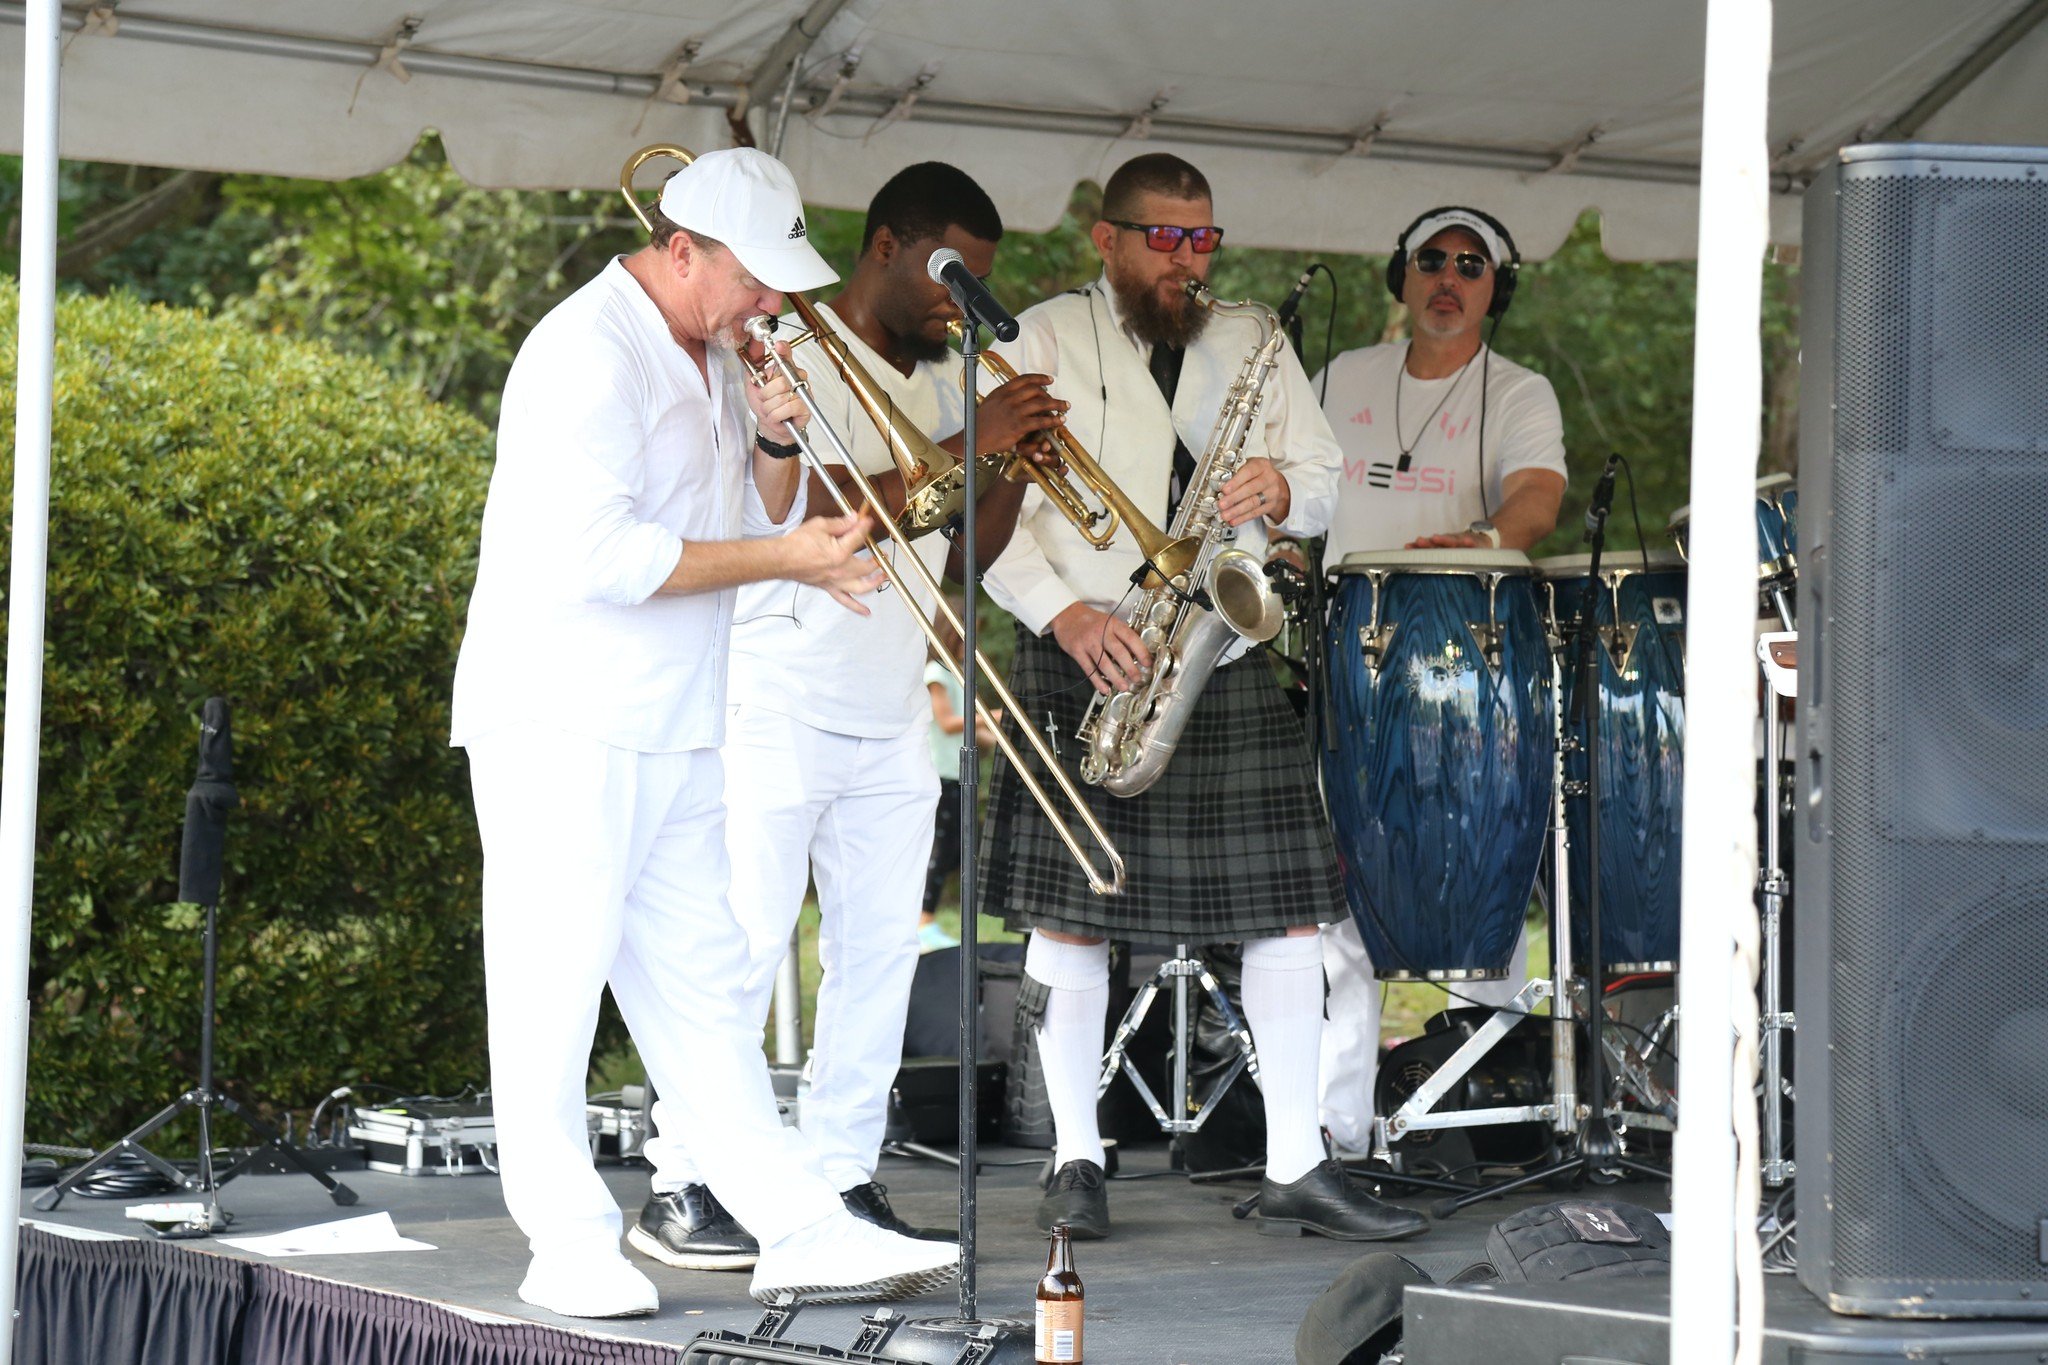 Dance the night away at the Brier Creek Food Truck Festival! 💃 

This year's band is Irresistible Groove, whose members have worked with musicians like Prince, James Brown, and more! 🎶 Don't miss out, it's going to be an amazing night!

For more in